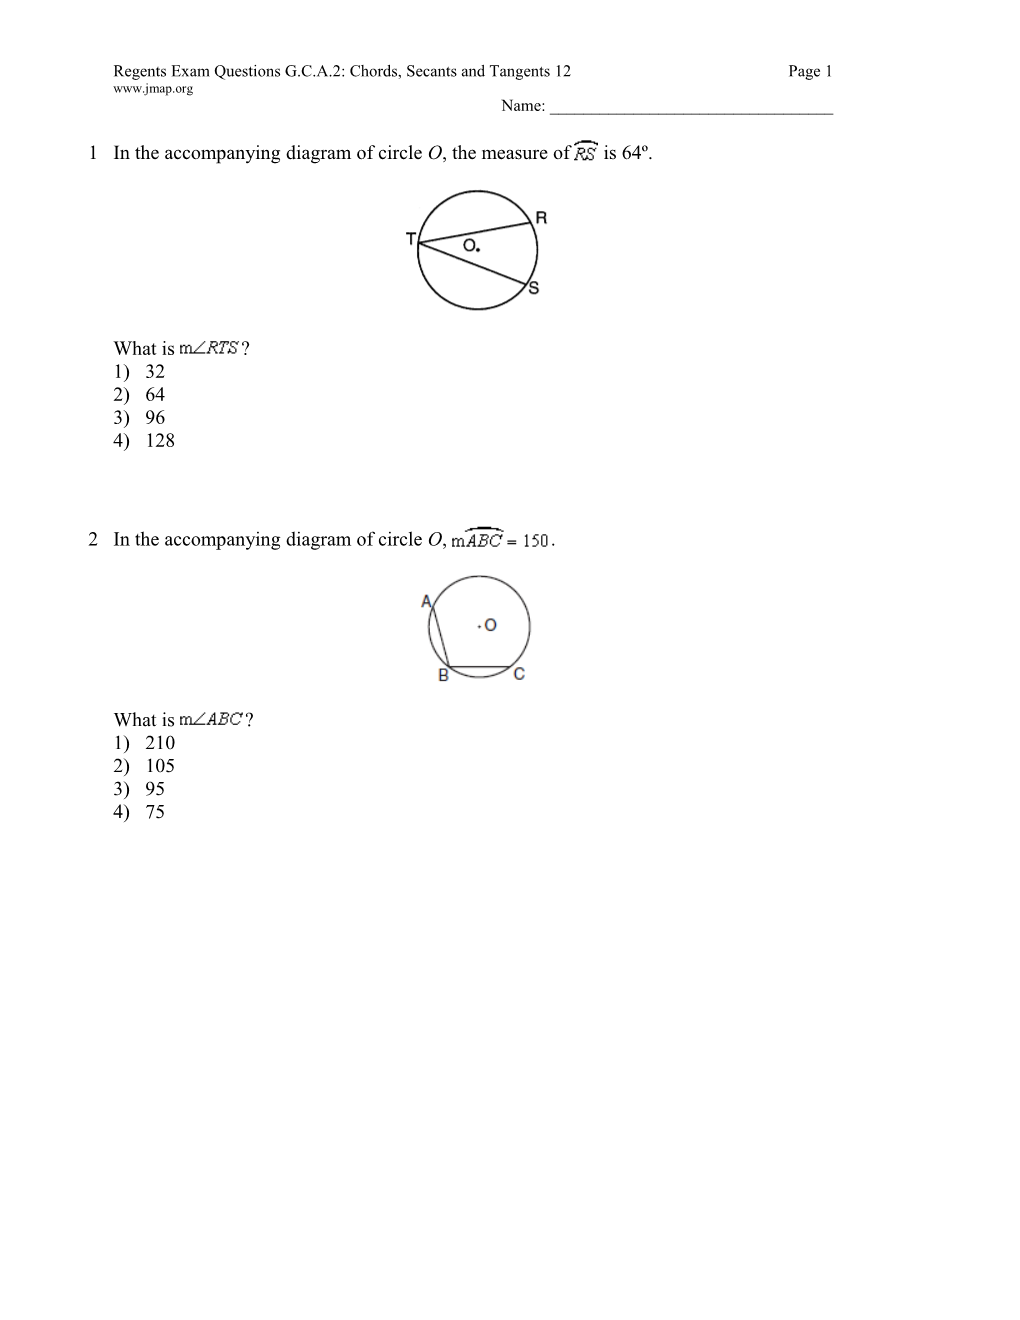 Regents Exam Questions G.C.A.2: Chords, Secants and Tangents 12 Page 8